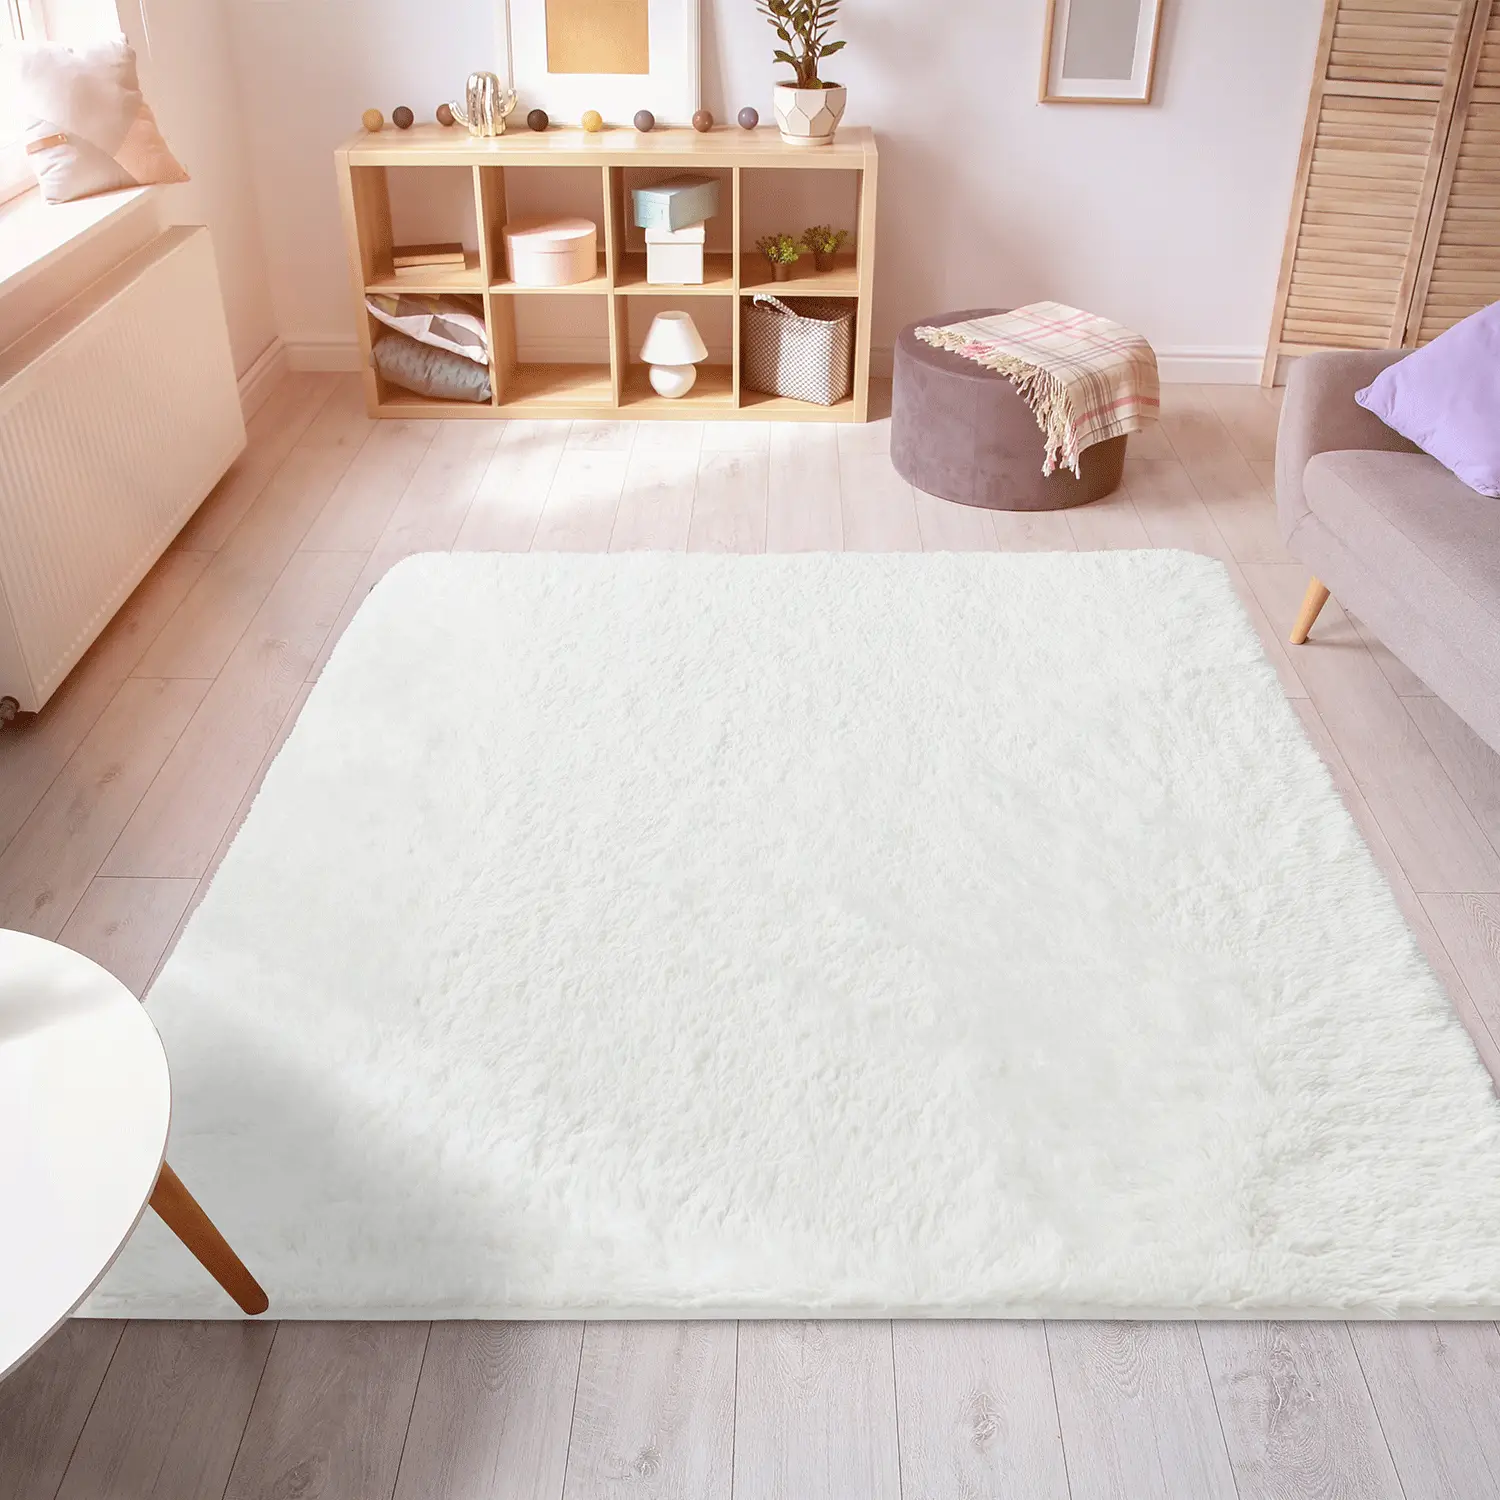 Merry Home Living Room Fuzzy Area Rugs for Bedroom Fluffy for Kids Room, Floor Indoor Shaggy Plush 